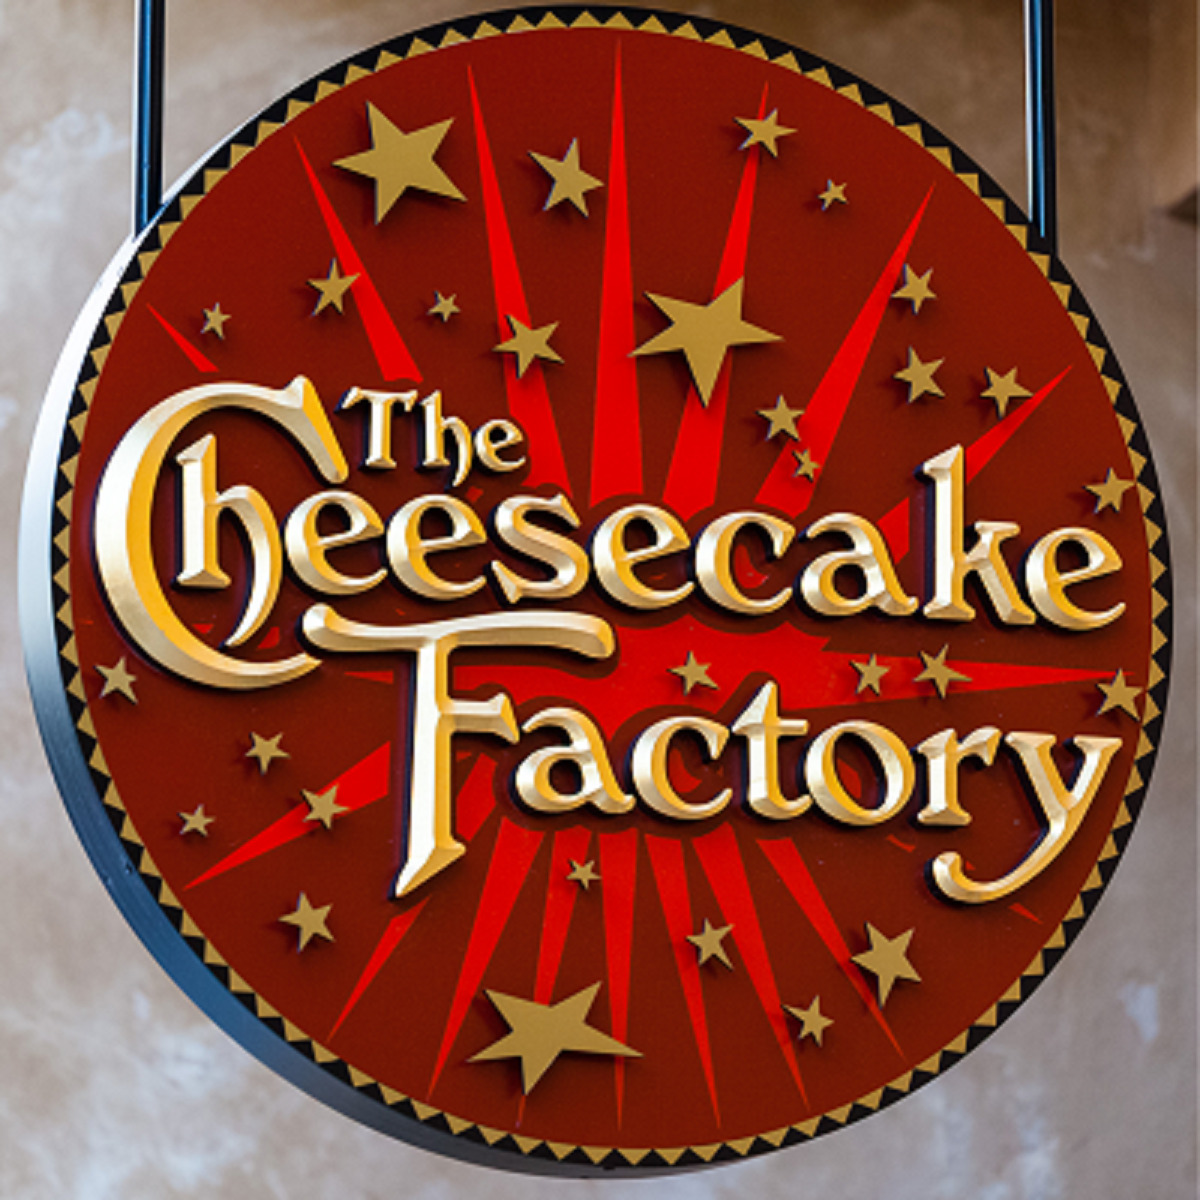 Cheesecake Factory Specials 10 Off, Happy Hour